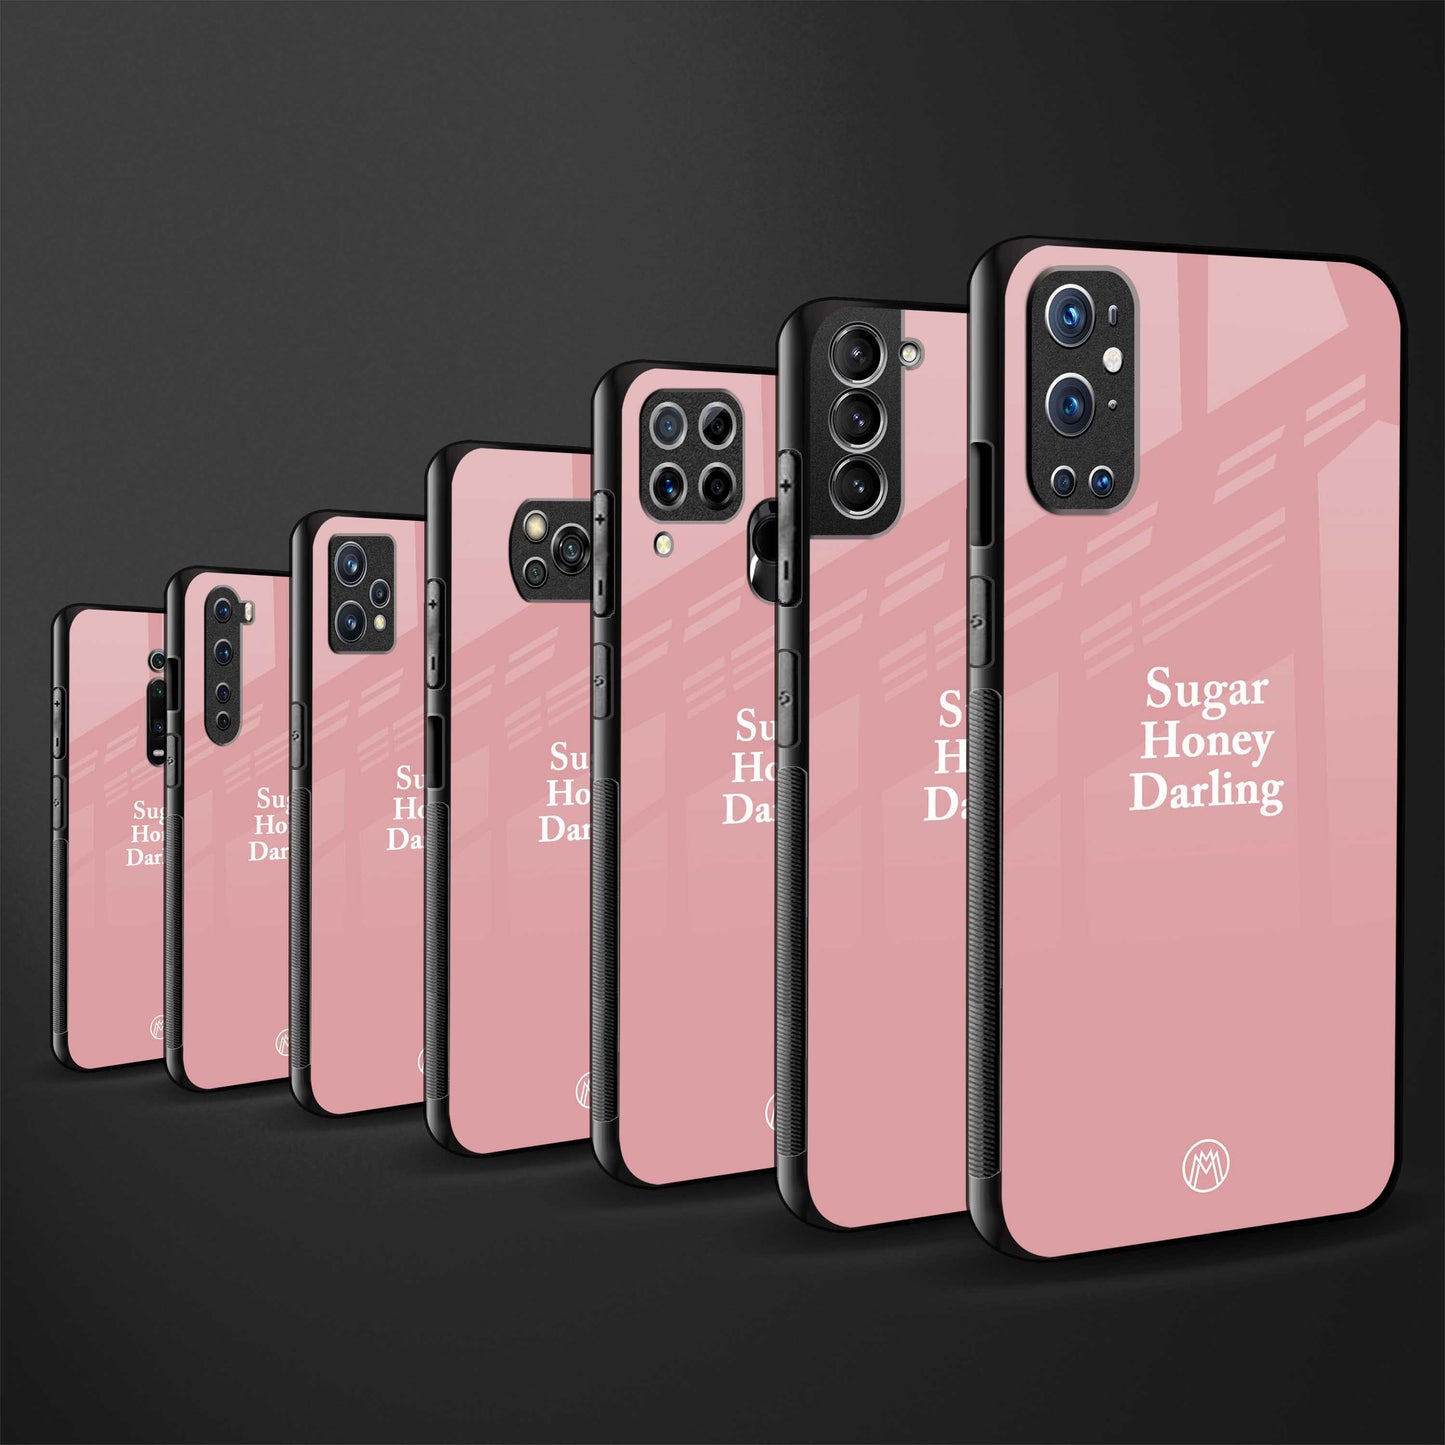 suger honey darling glass case for oppo a9 2020 image-3